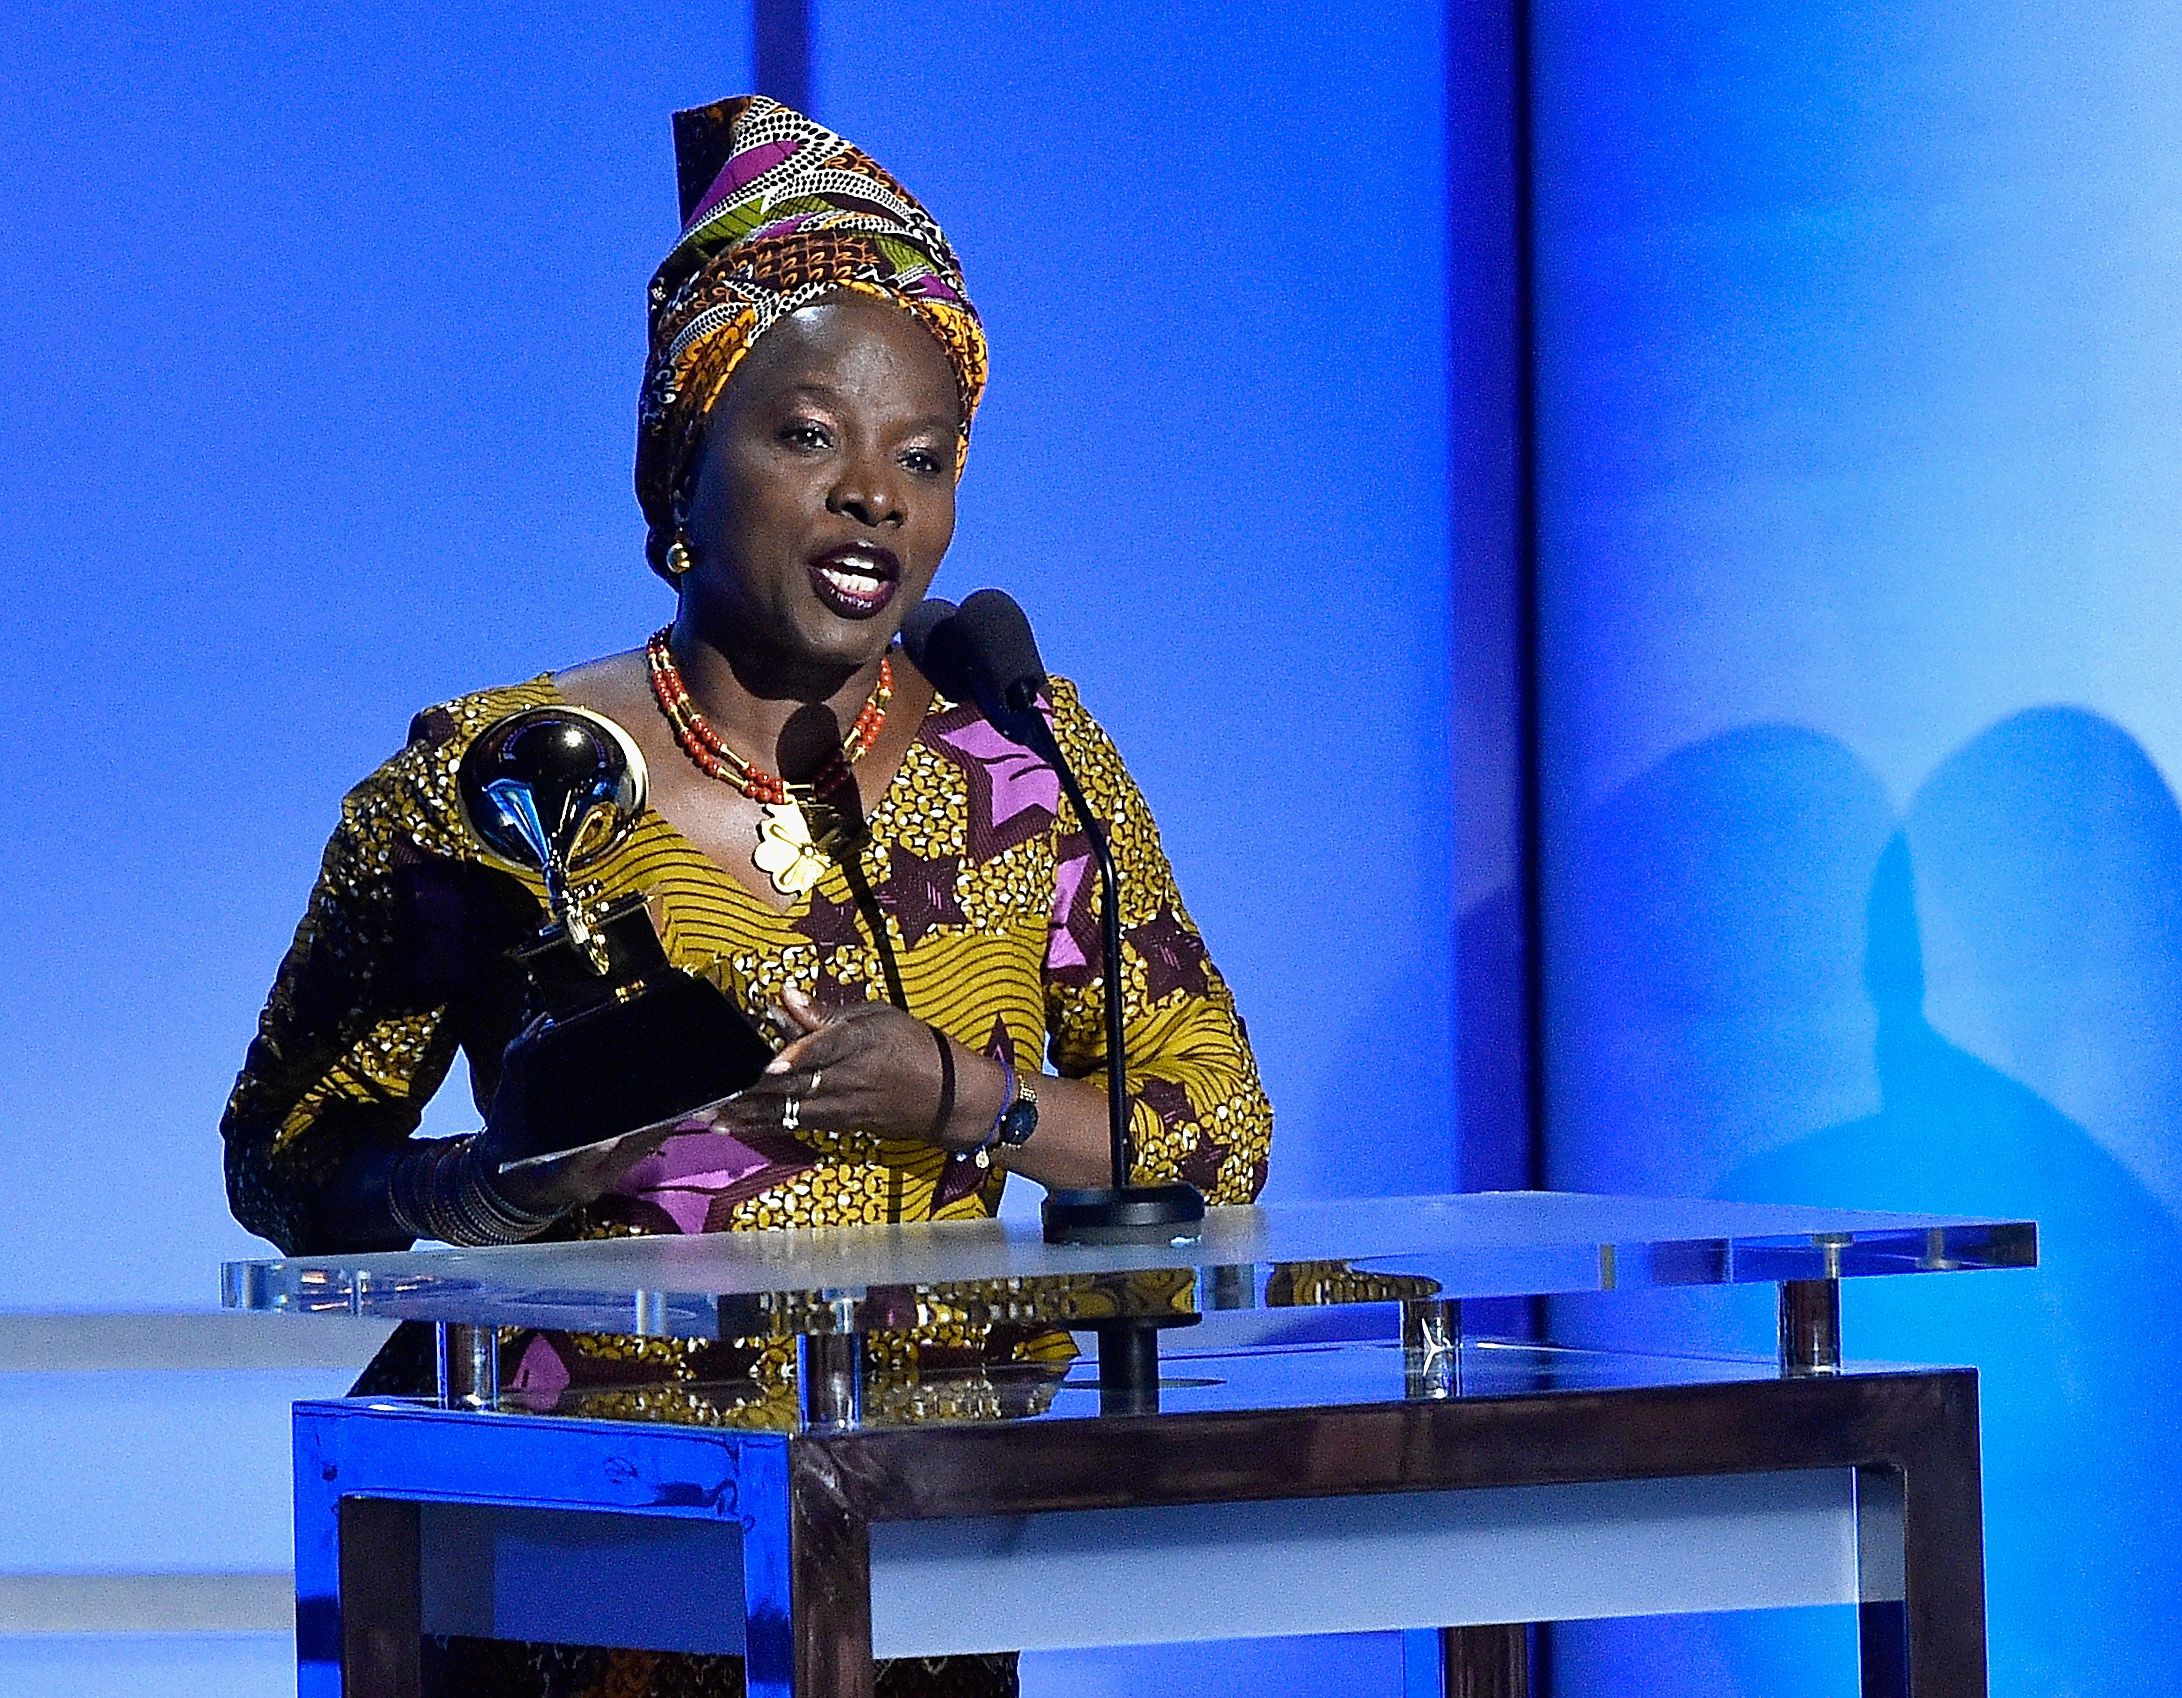 Angelique Kidjo receives the award for Best World Music Album at the GRAMMYs.